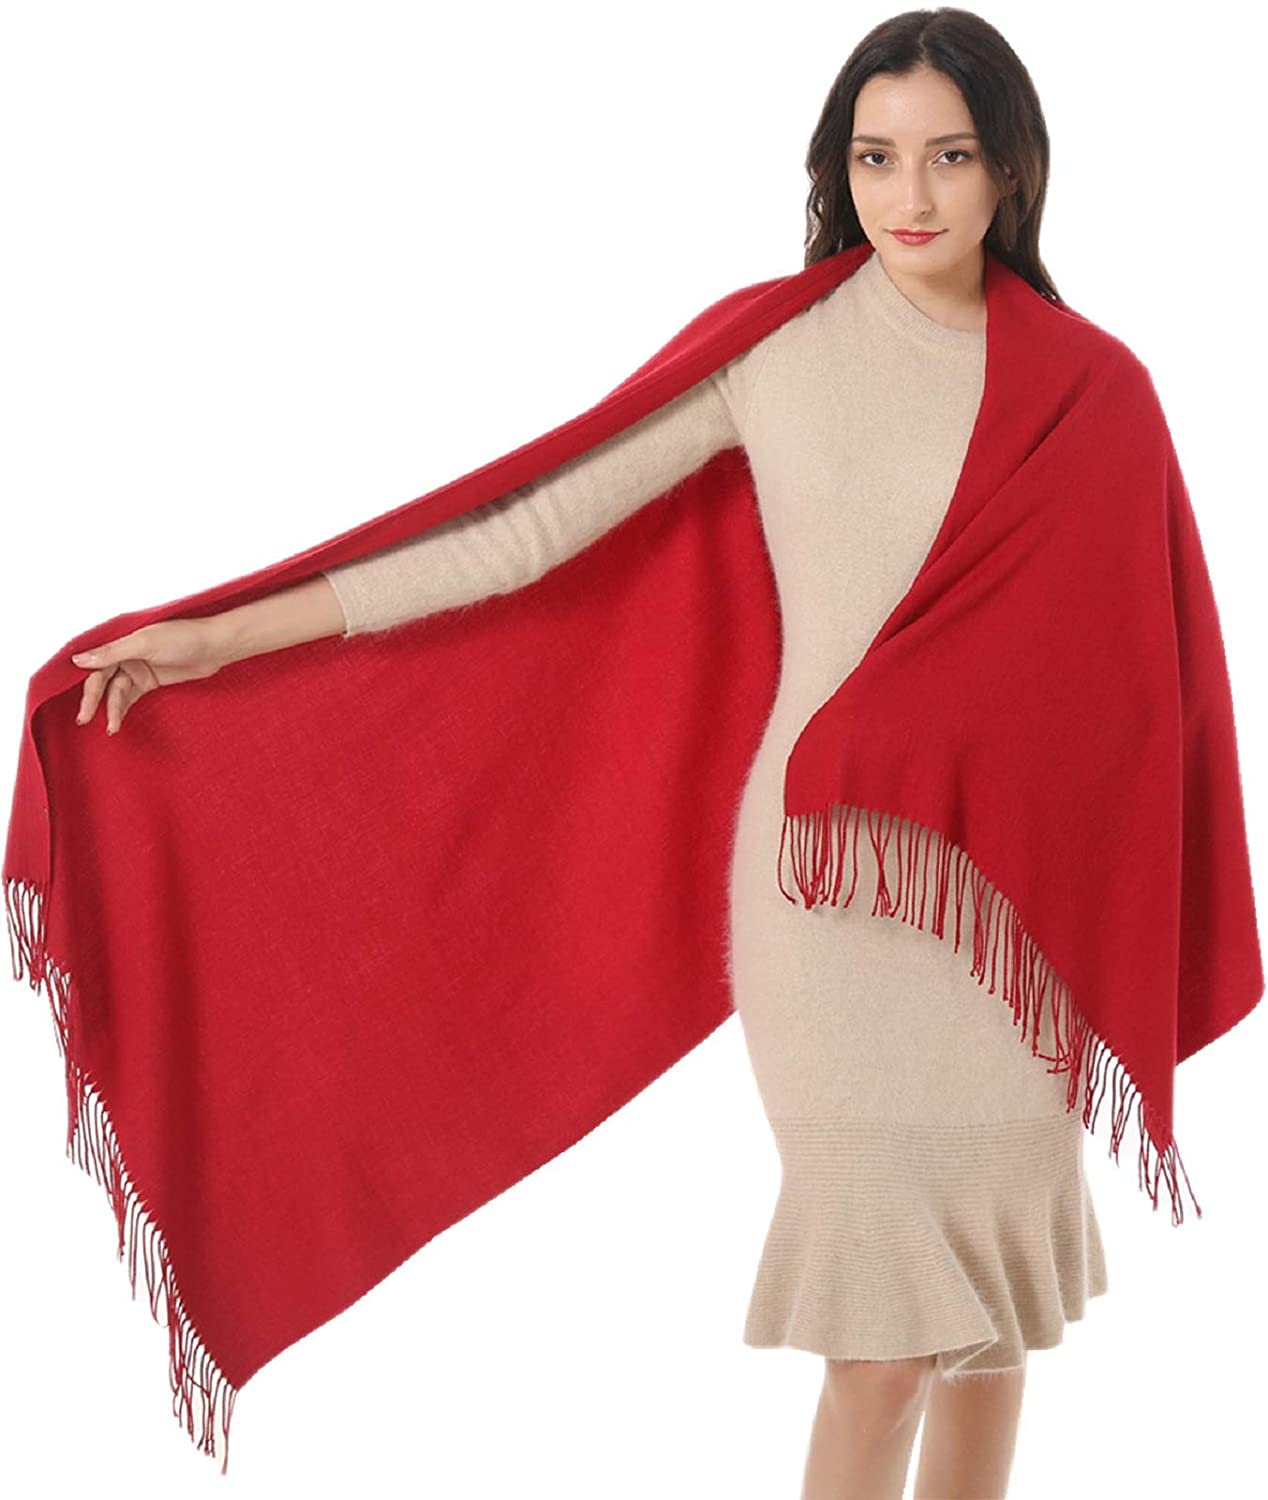 ALAZA Women's Scarves Winter Scarf Cashmere Feel Pashmina Shawls Wraps Red  Lips Kiss Print Soft Warm Lightweight with Tassels Fall at  Women's  Clothing store